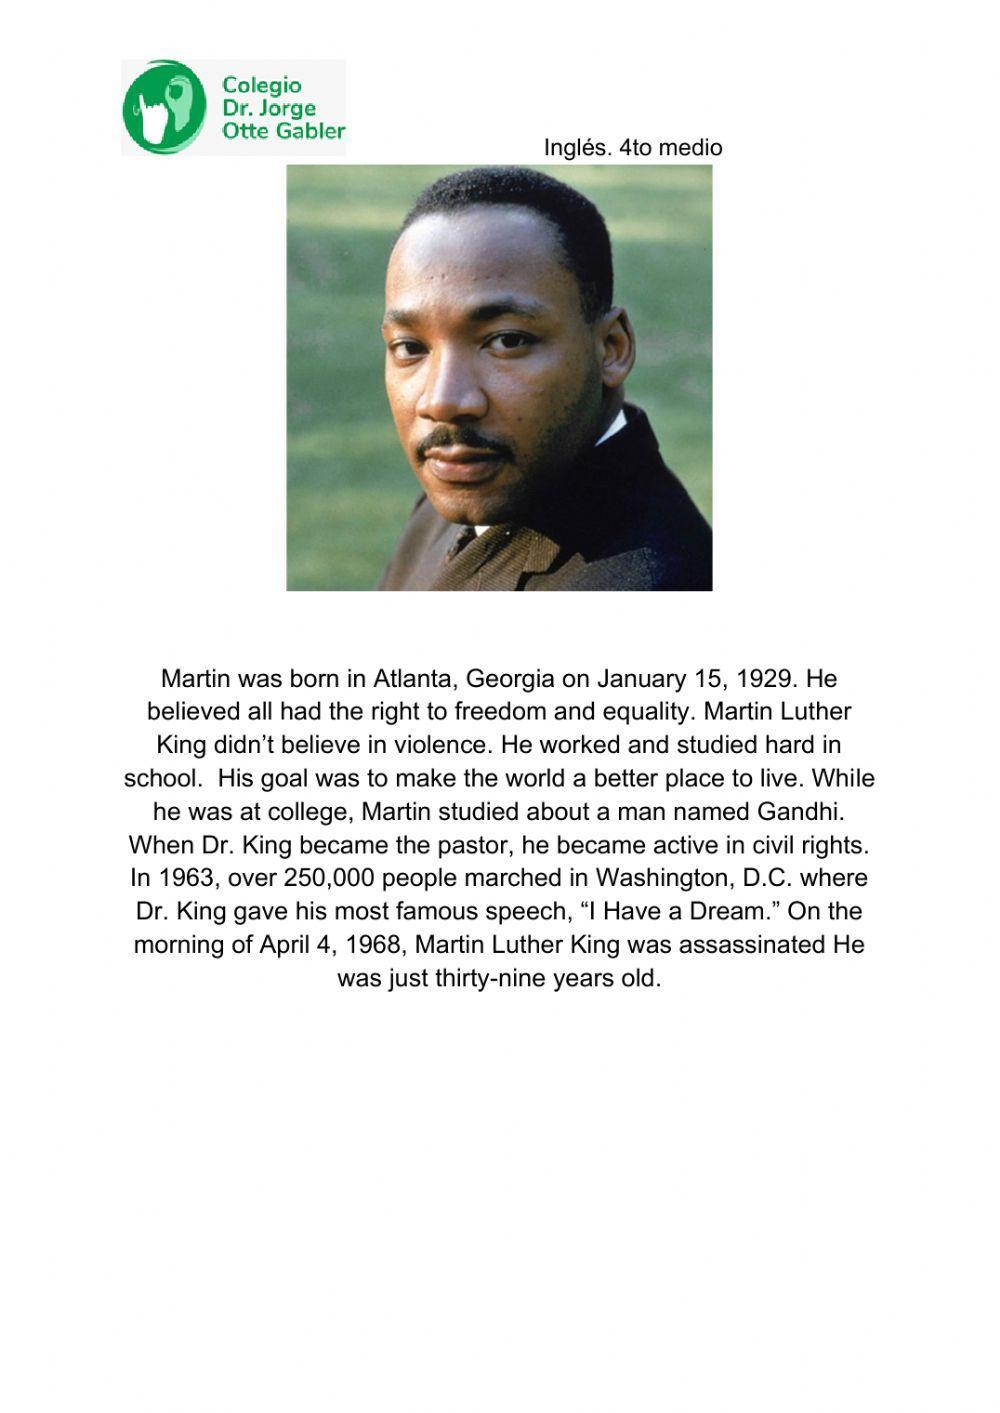 Reading comprehension- Martin Luther King